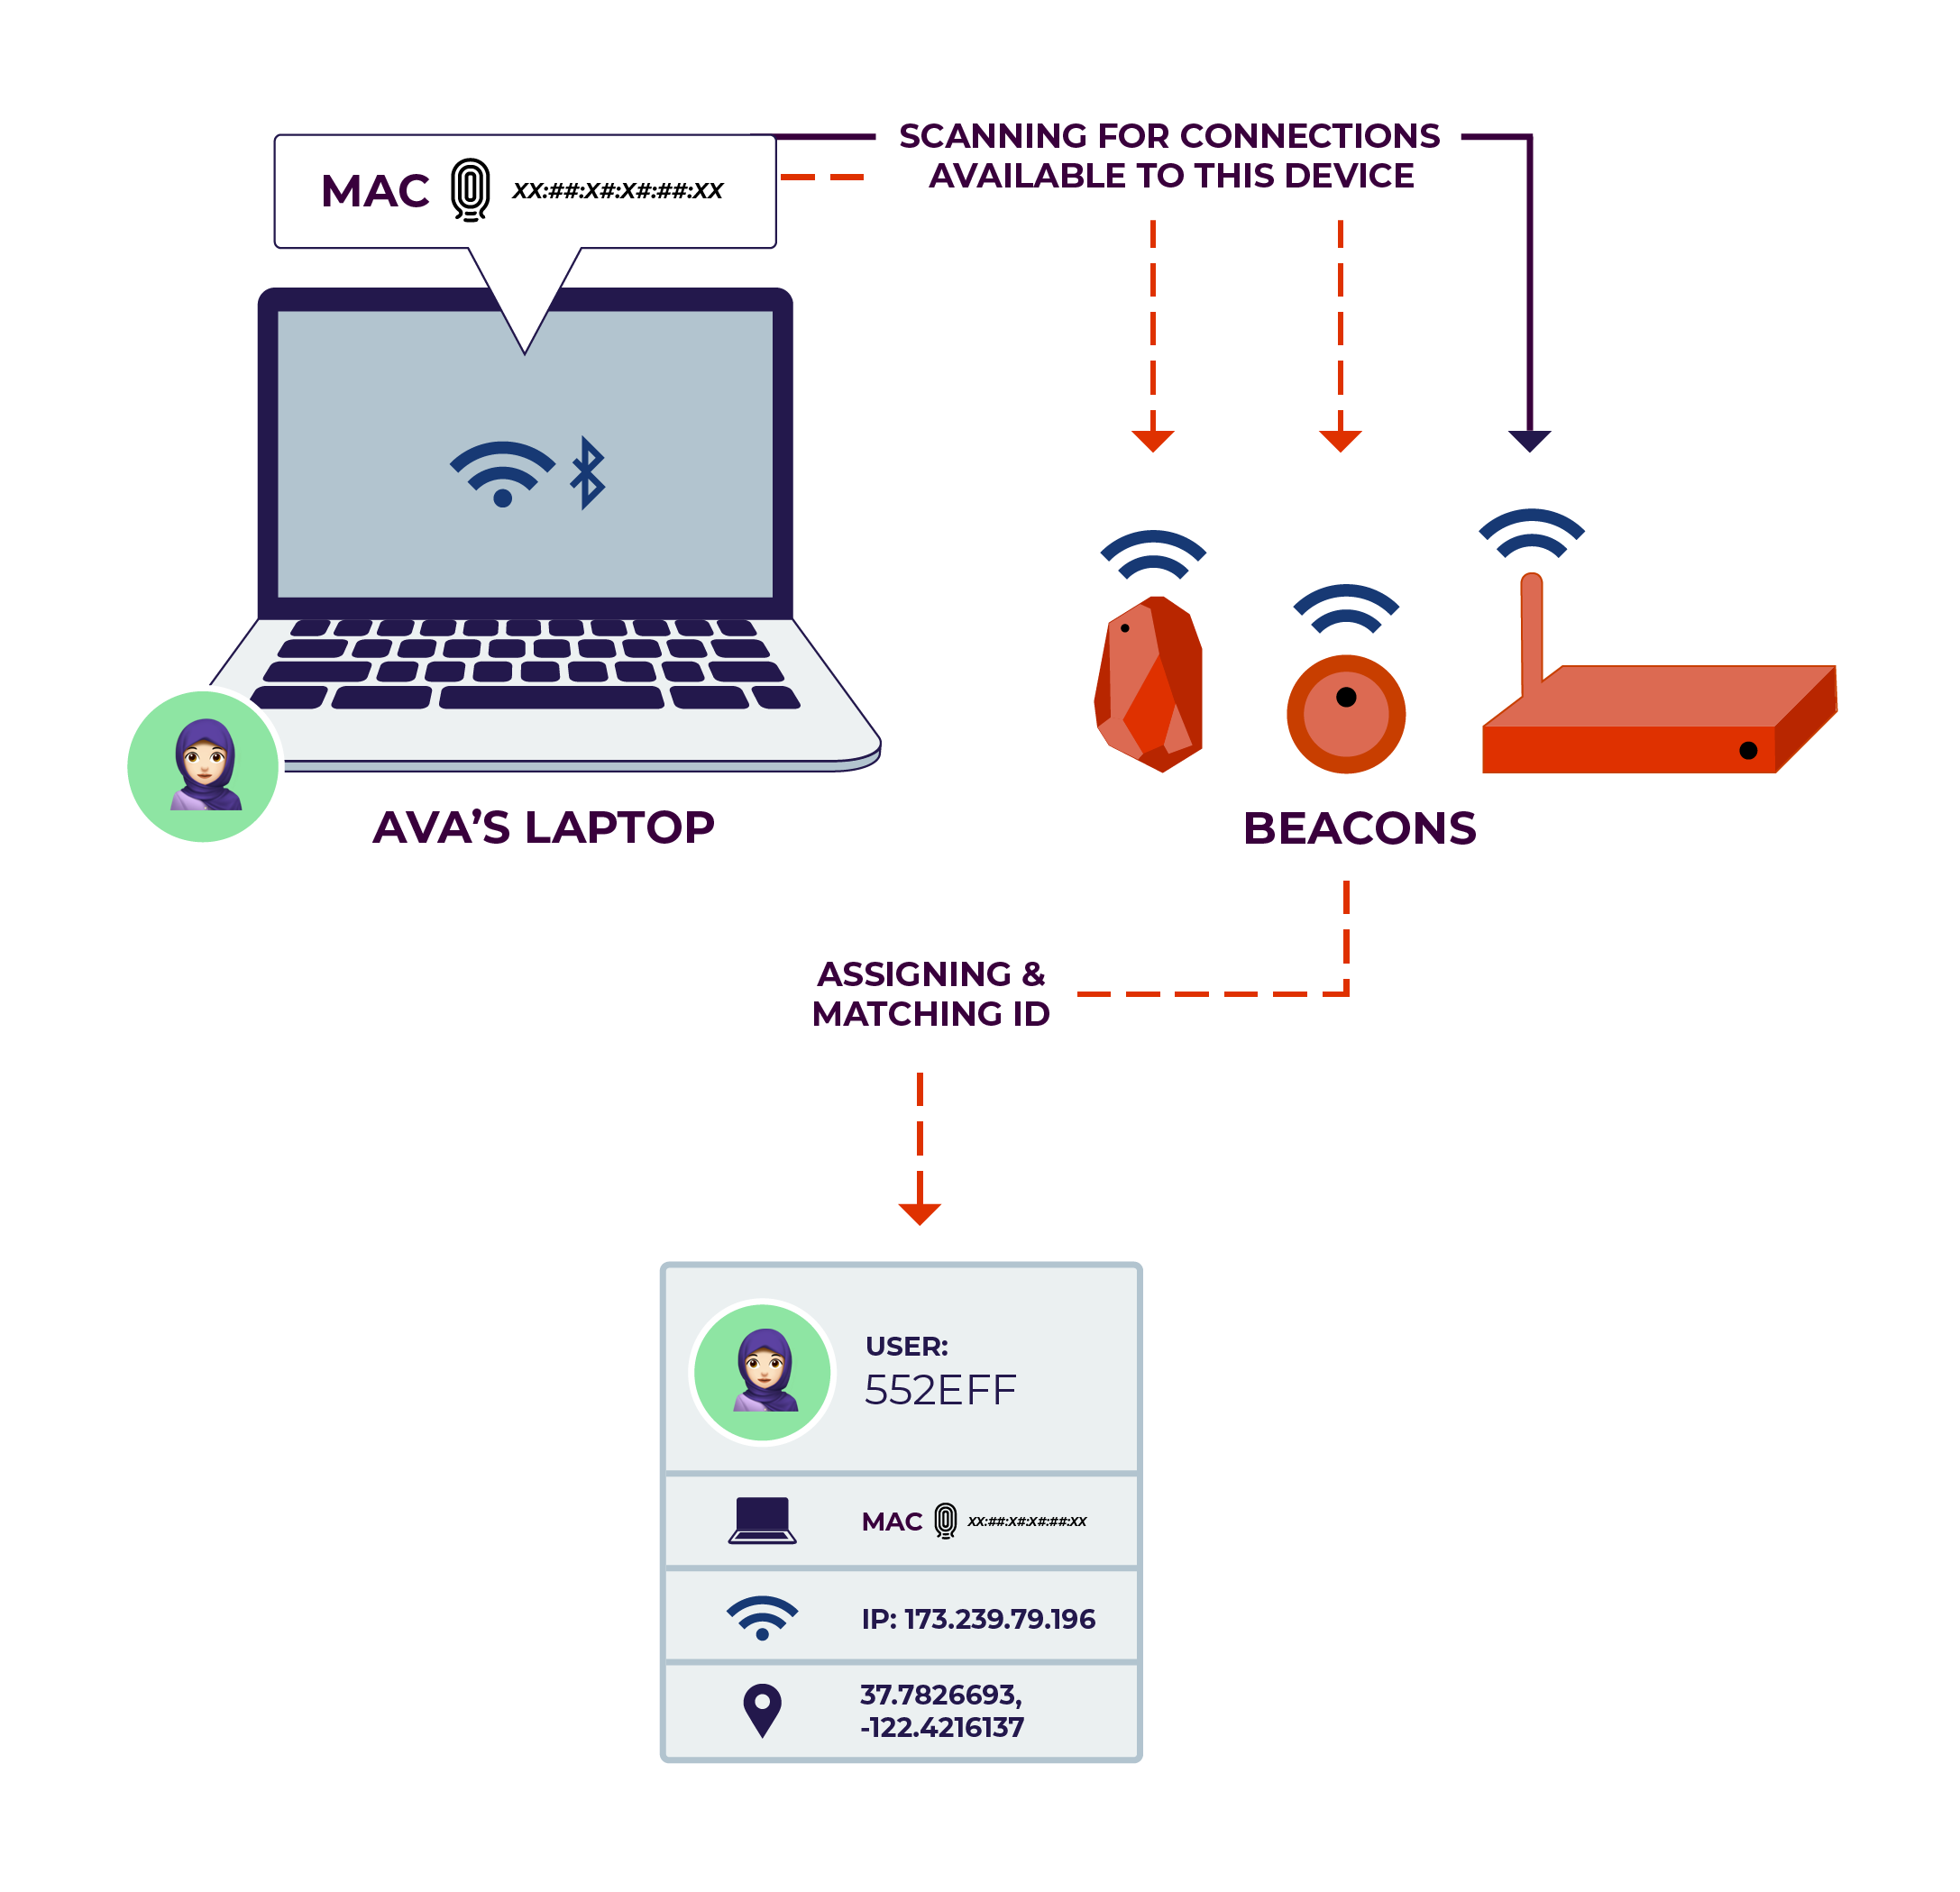 A laptop emits probe requests containing its a MAC address. Wireless Bbeacons listen for the probes and tie the requests to a profile of the user.